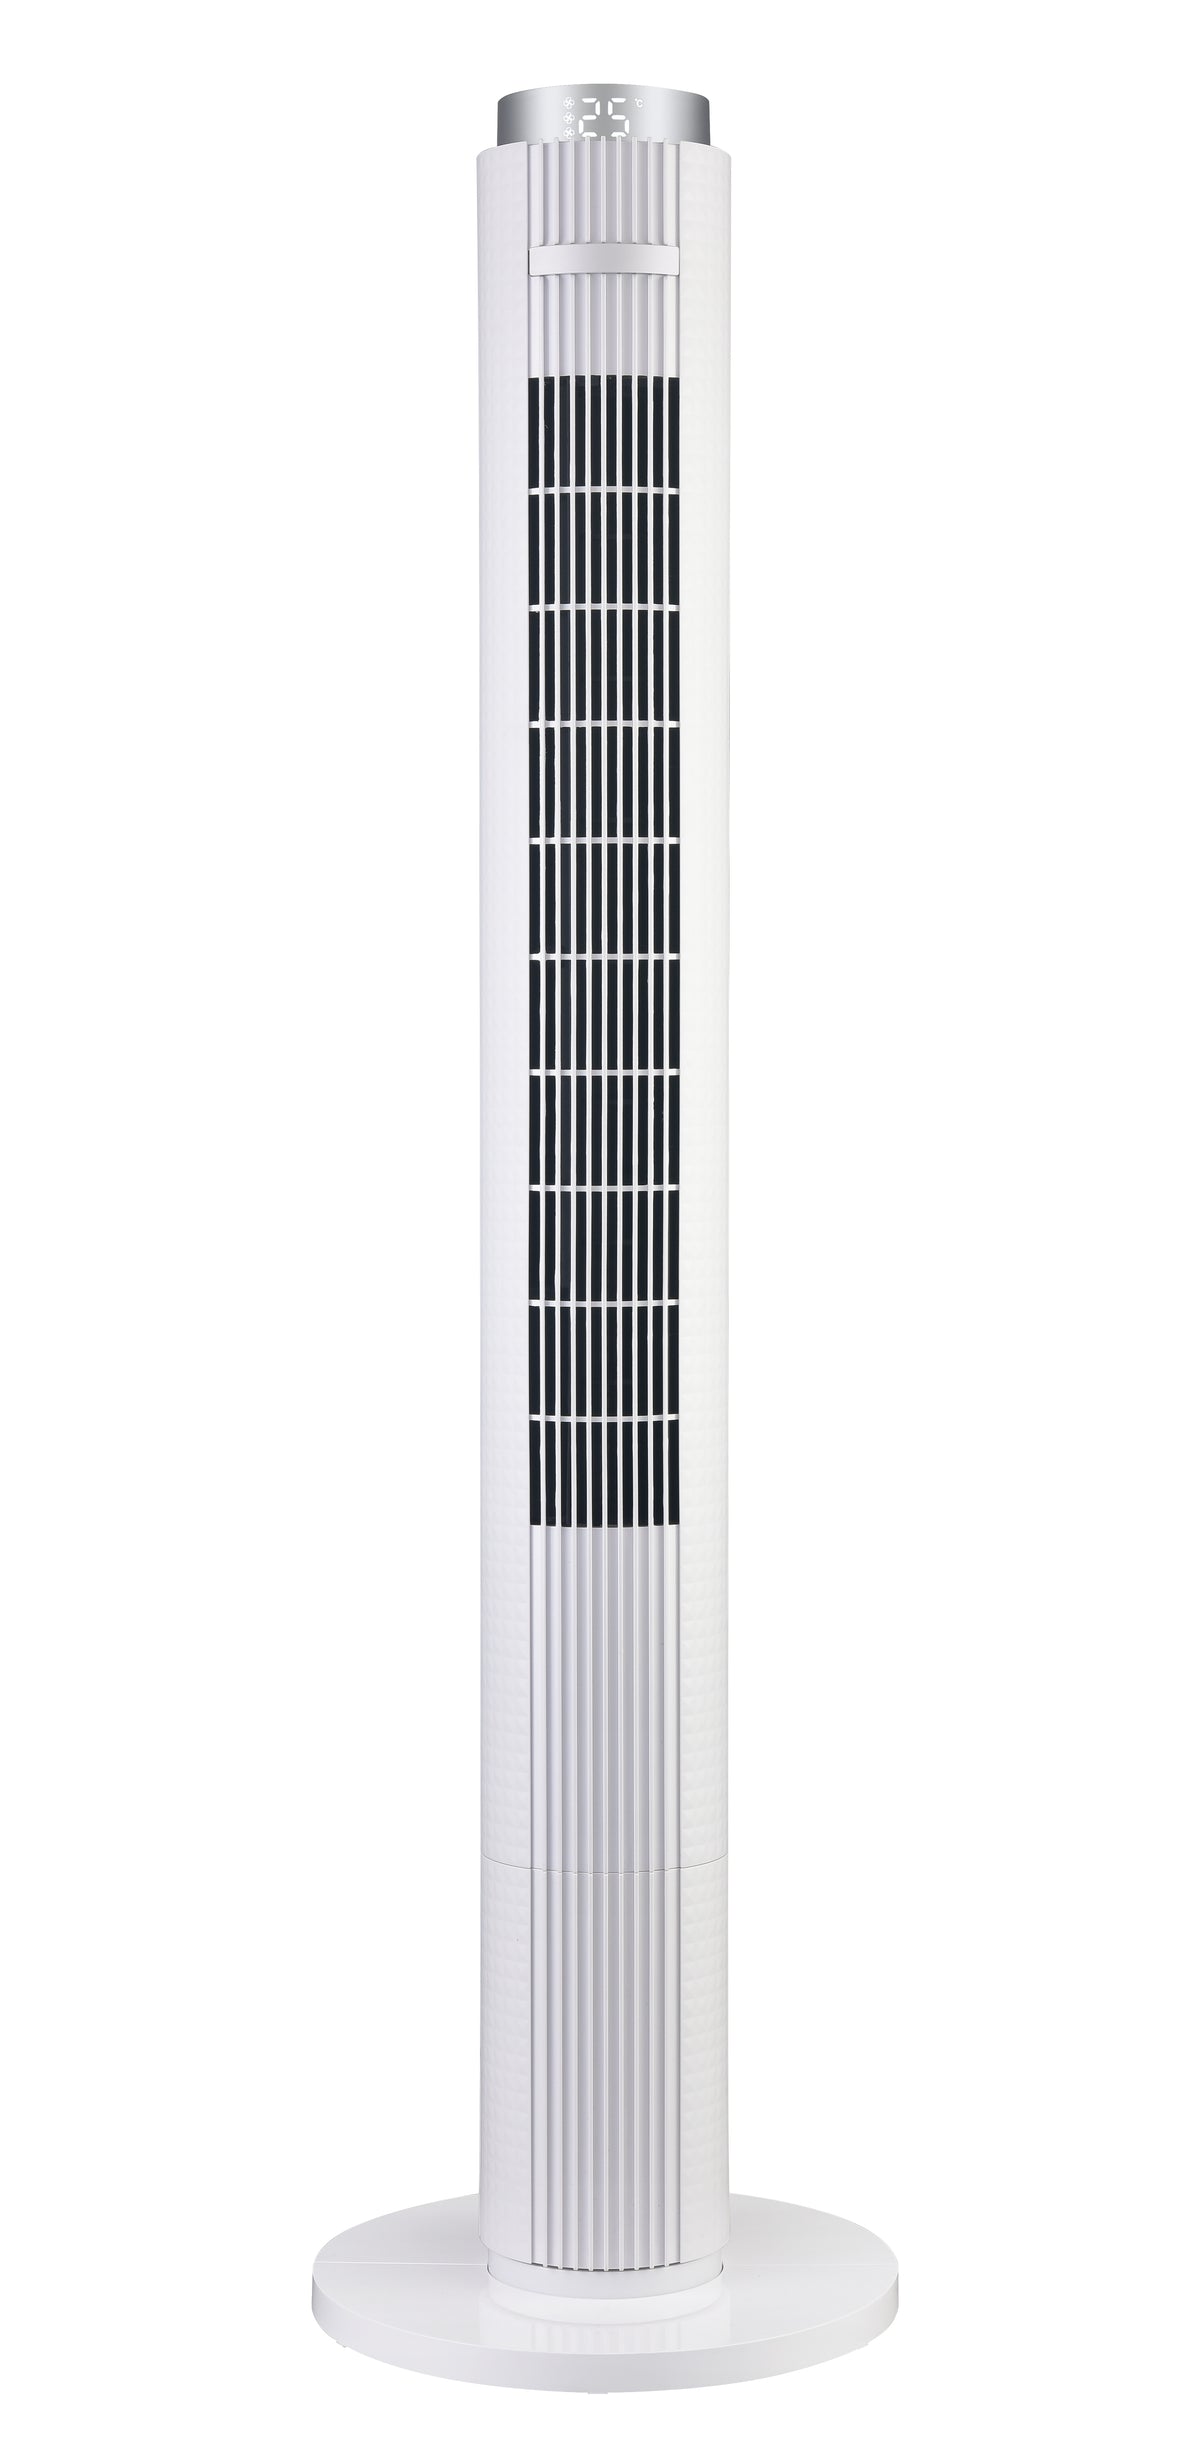 White 46-Inch Remote Controlled Tower Fan